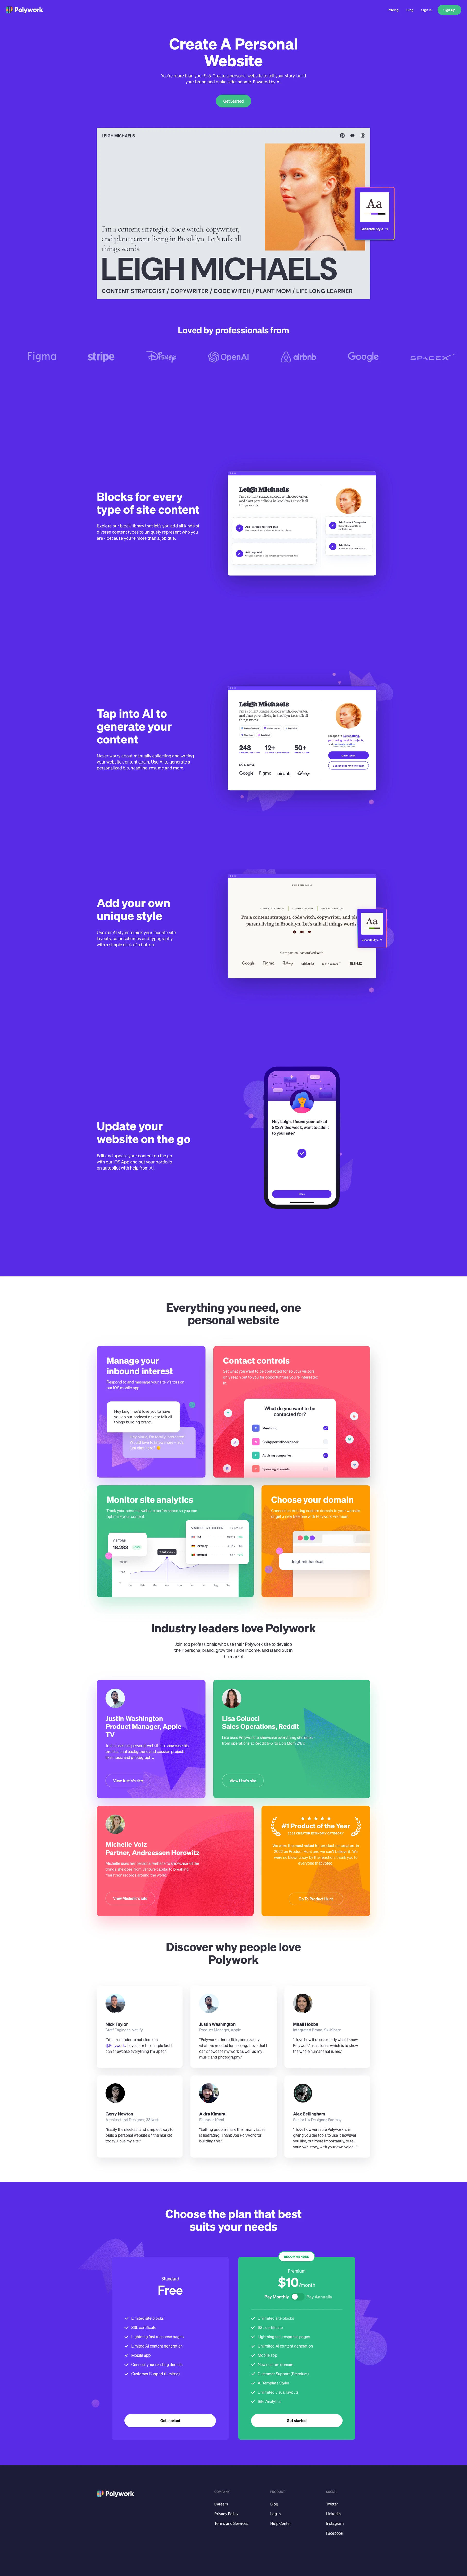 Polywork Landing Page Example: Create a personal website. You’re more than your 9-5. Create a personal website to tell your story, build your brand and make side income. Powered by AI.